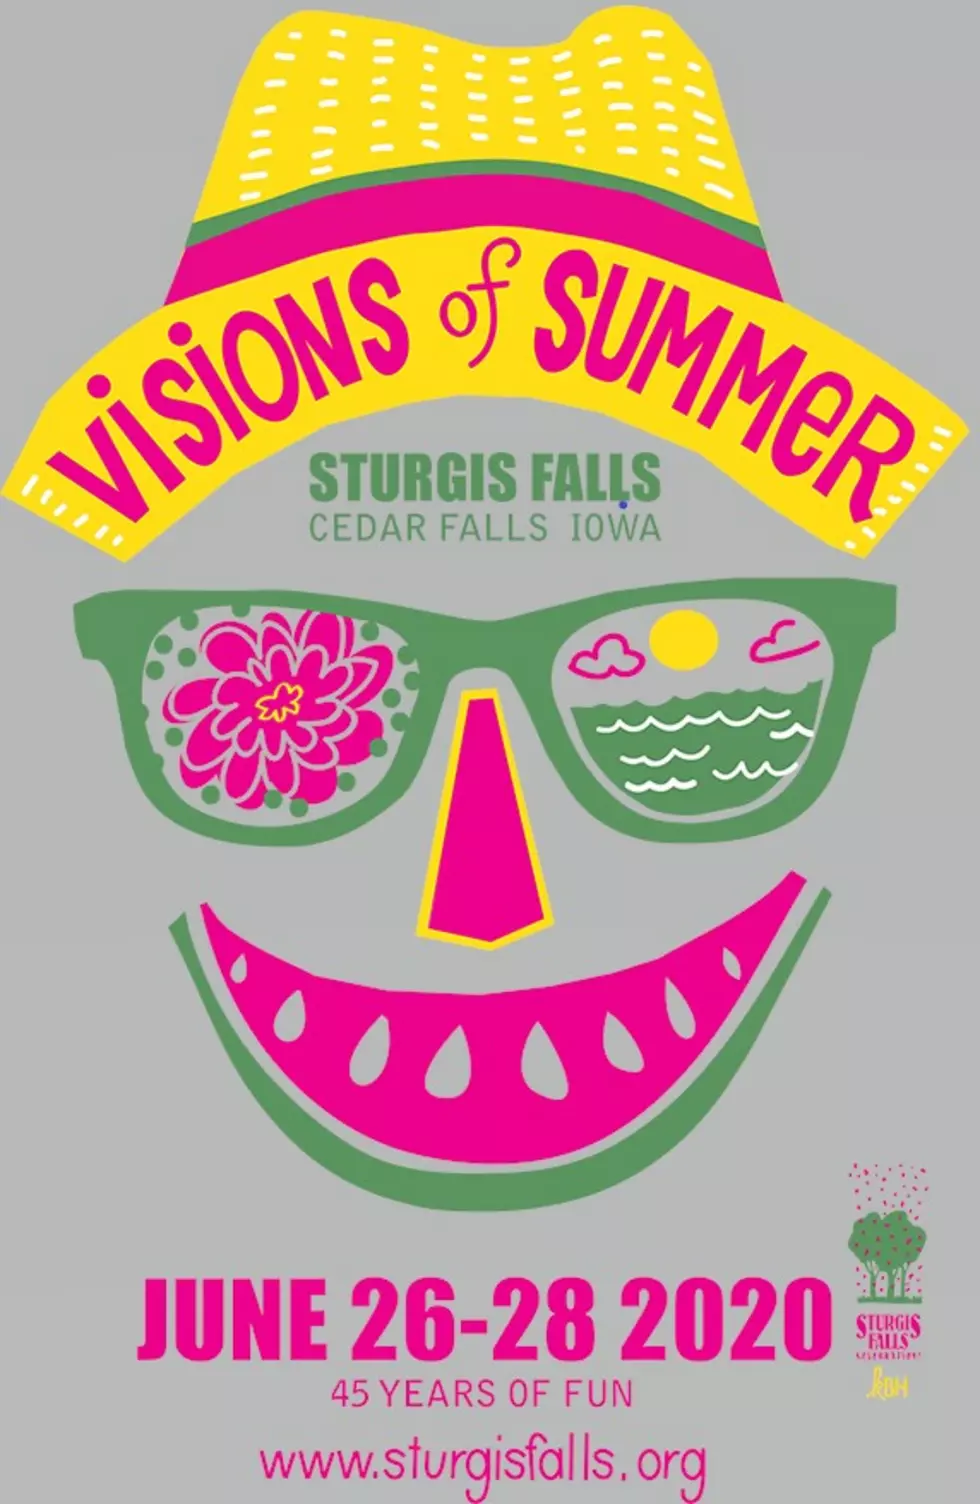 2020 Sturgis Falls Cancelled Due To COVID-19 Pandemic